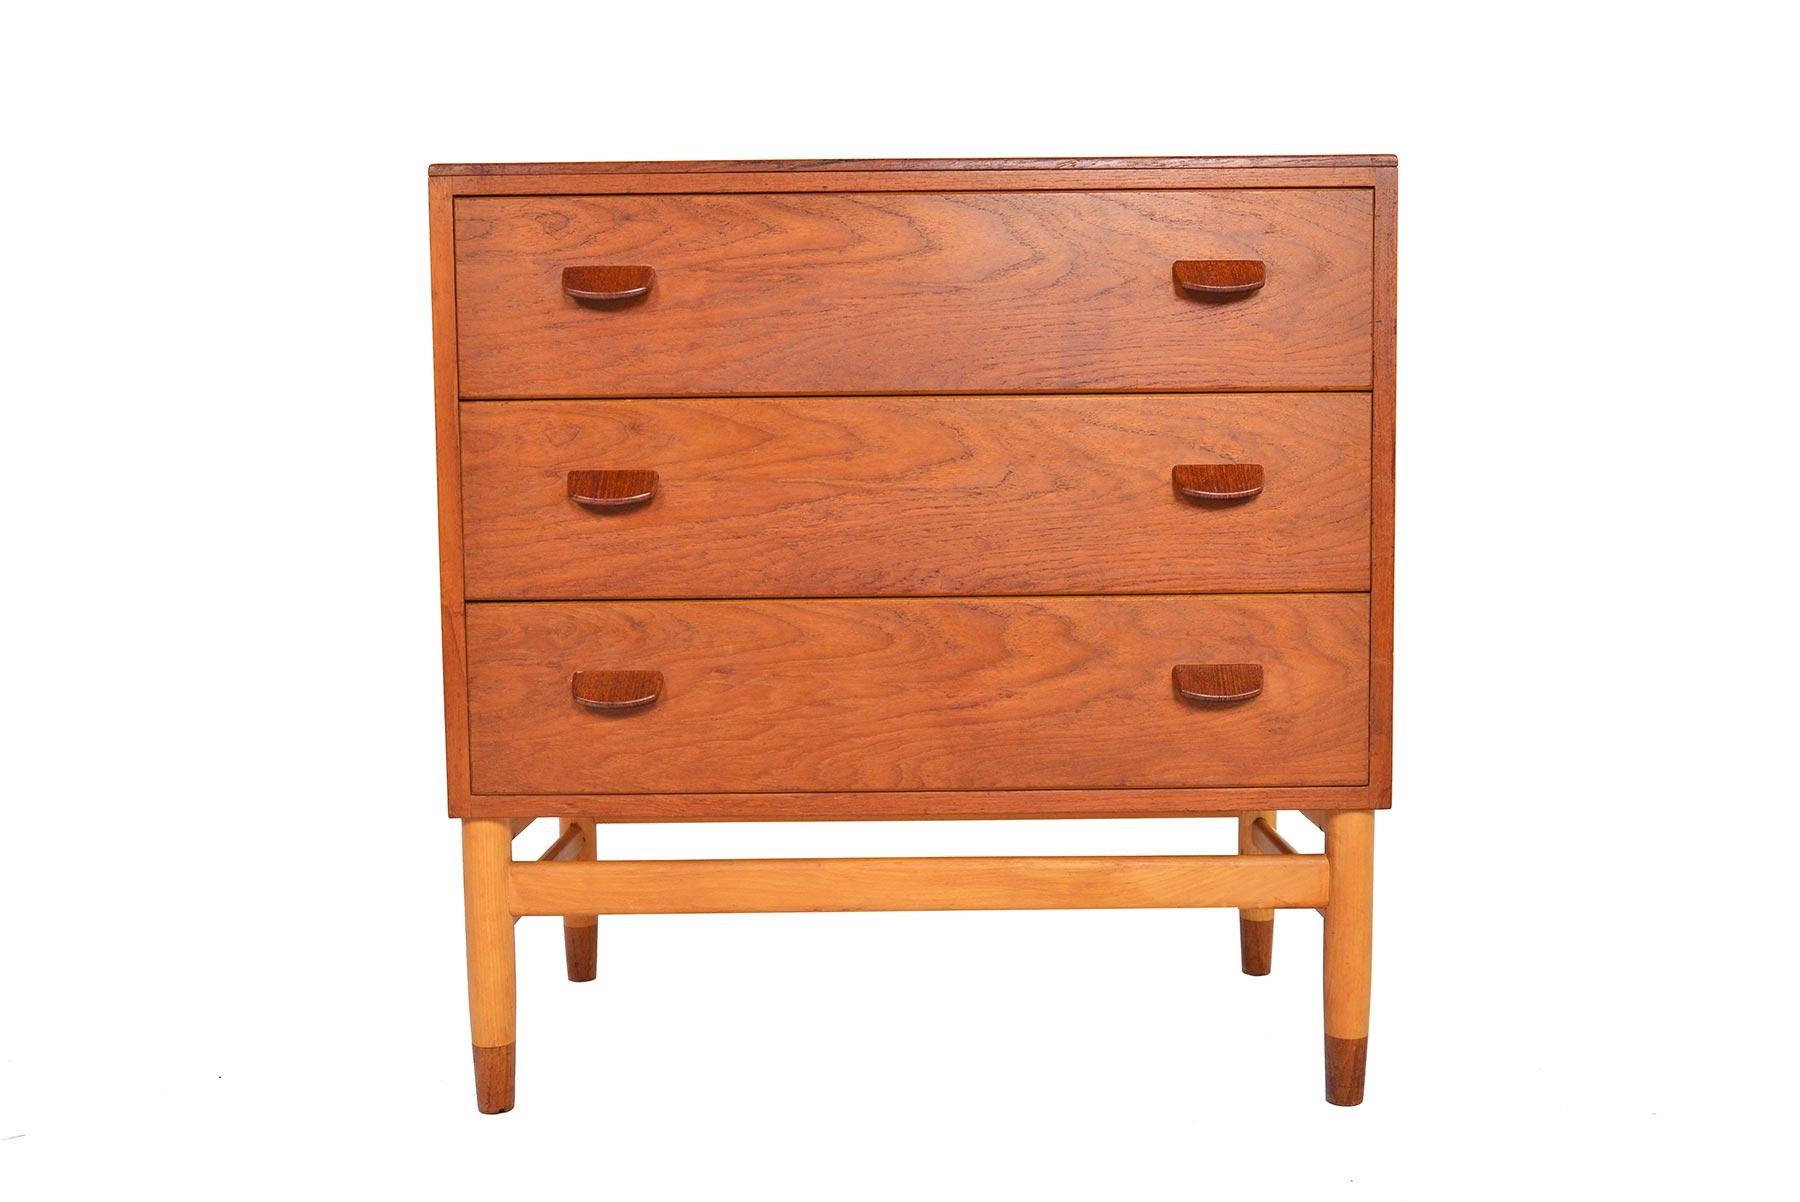 This gorgeous Danish modern three-drawer teak gentleman’s chest designed by Poul Volther is a rare find. Rich wood grain and high quality construction define this Classic piece. Each drawer features two teak flat pulls. Case stands on beech leg base